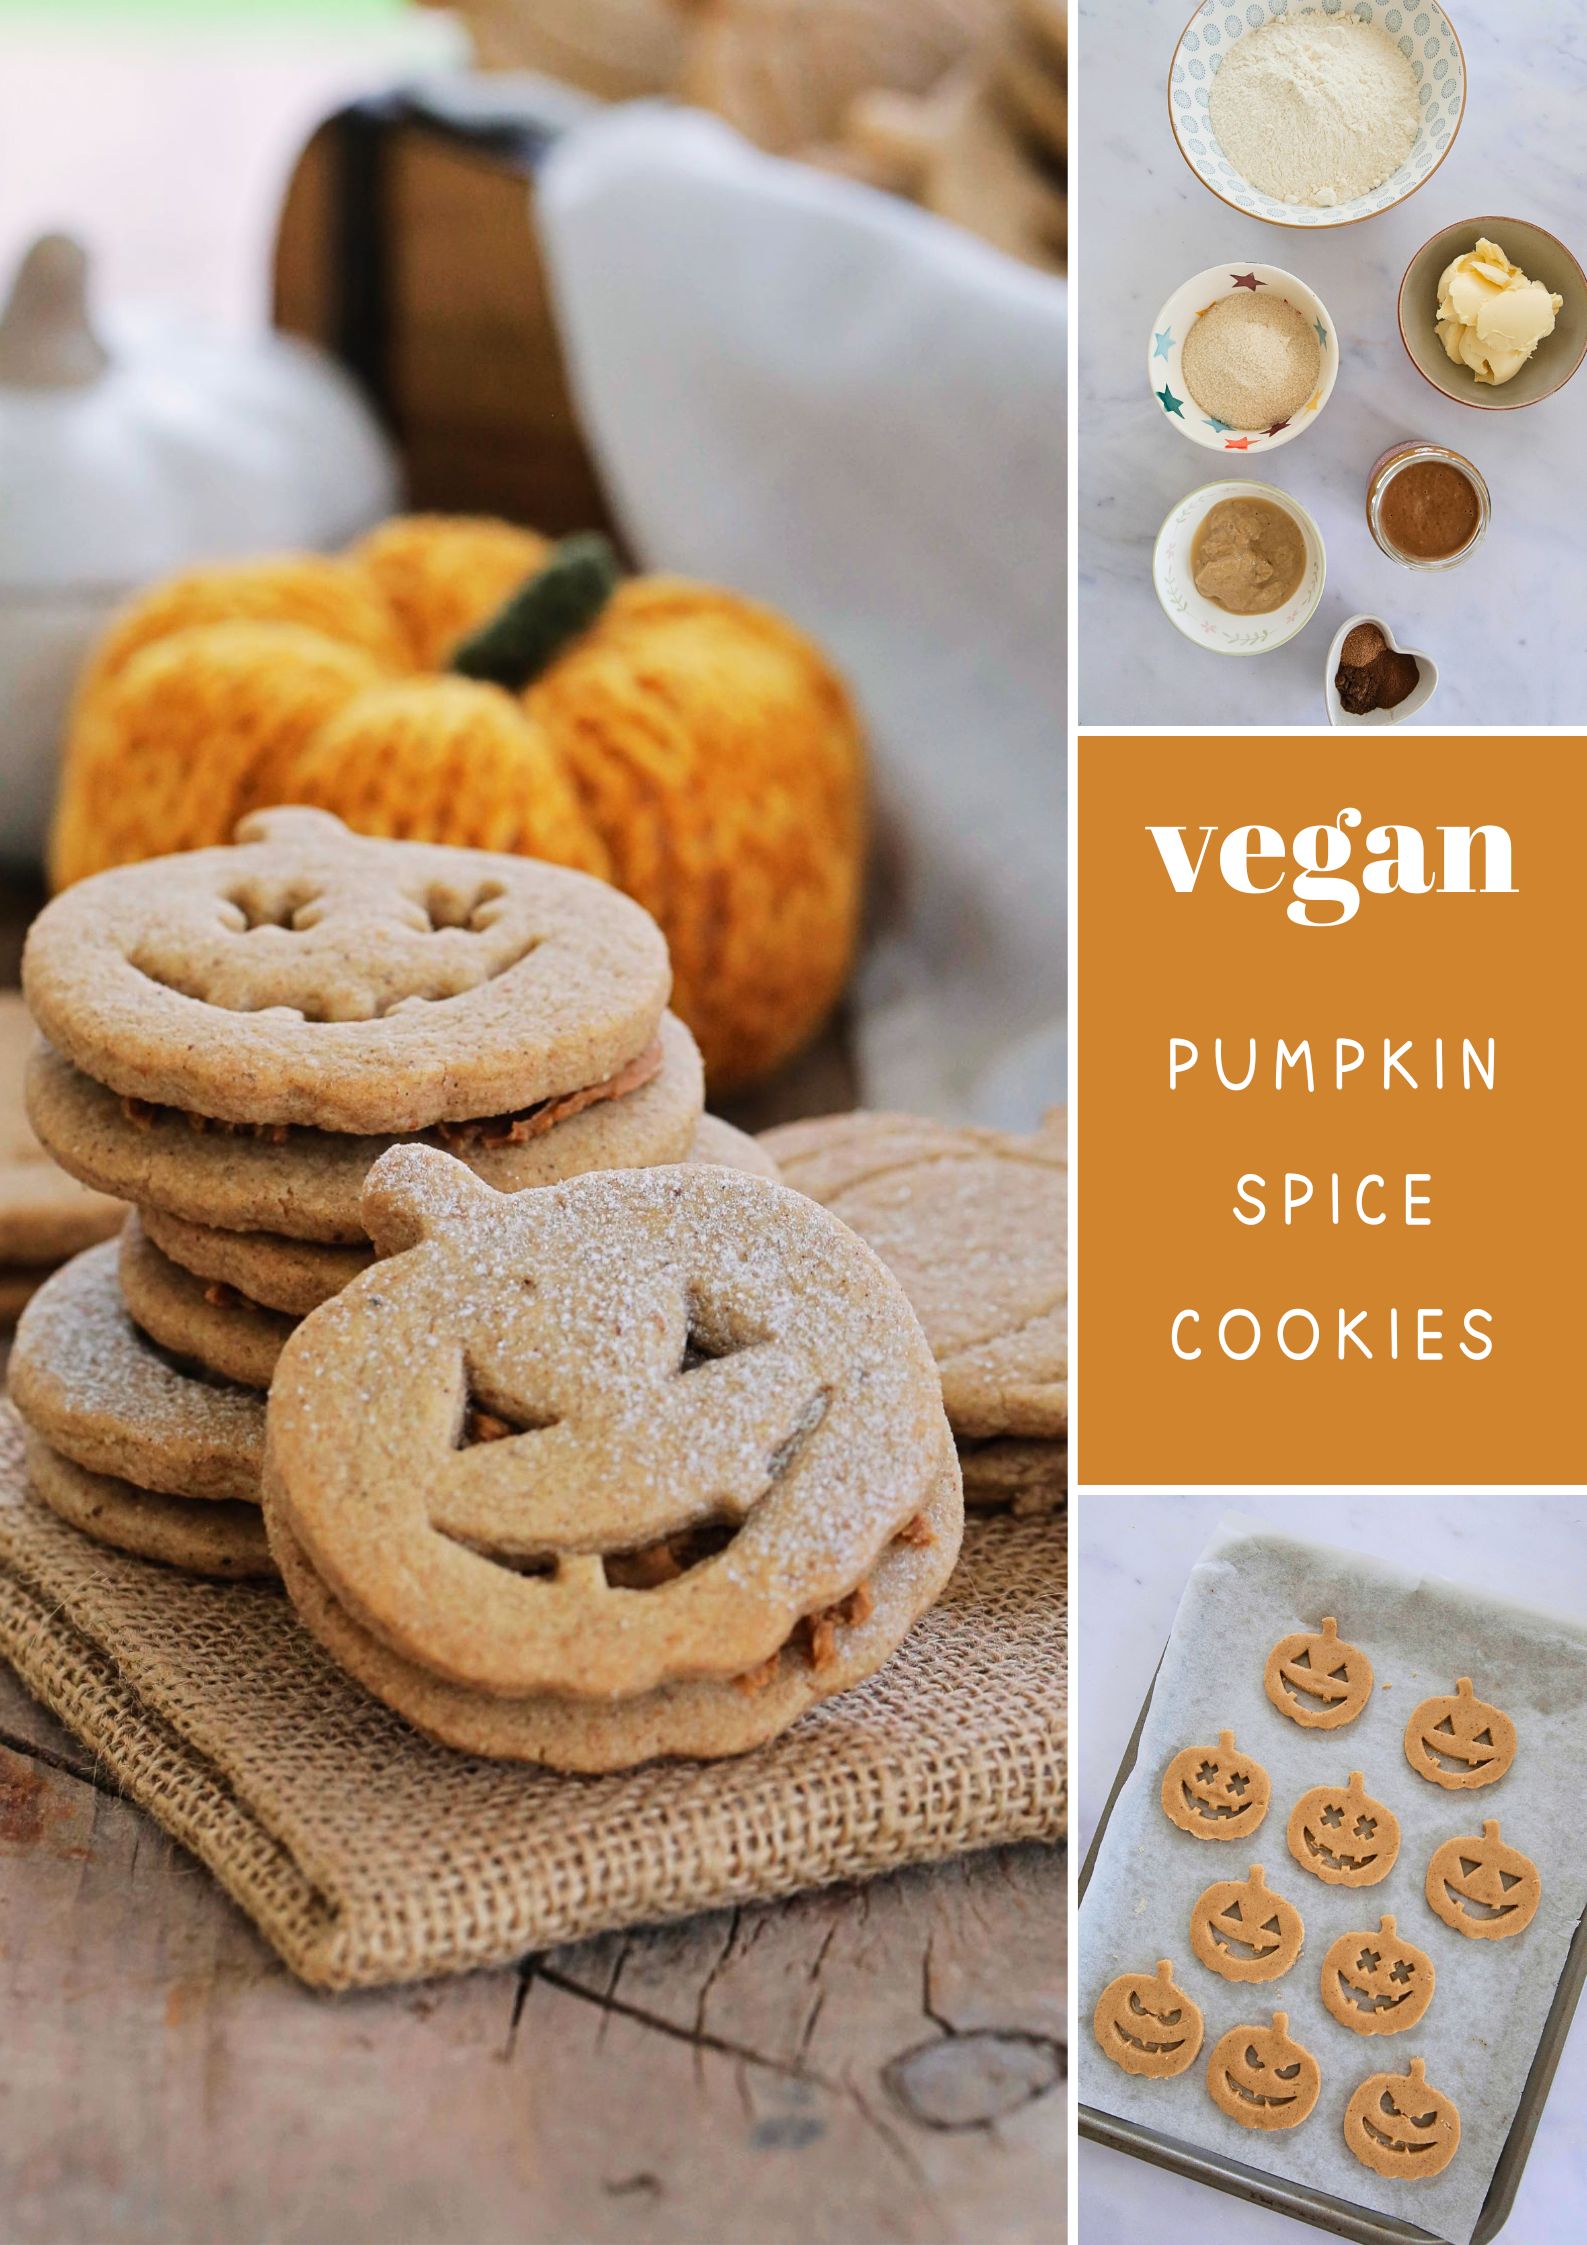 Buttery vegan shortbread flavoured with pumpkin spice make these Halloween cookies frightfully delicious! An easy Halloween treat for all ages | Recipe on thecookandhim.com #halloweencookies #pumpkinspice #veganhalloween